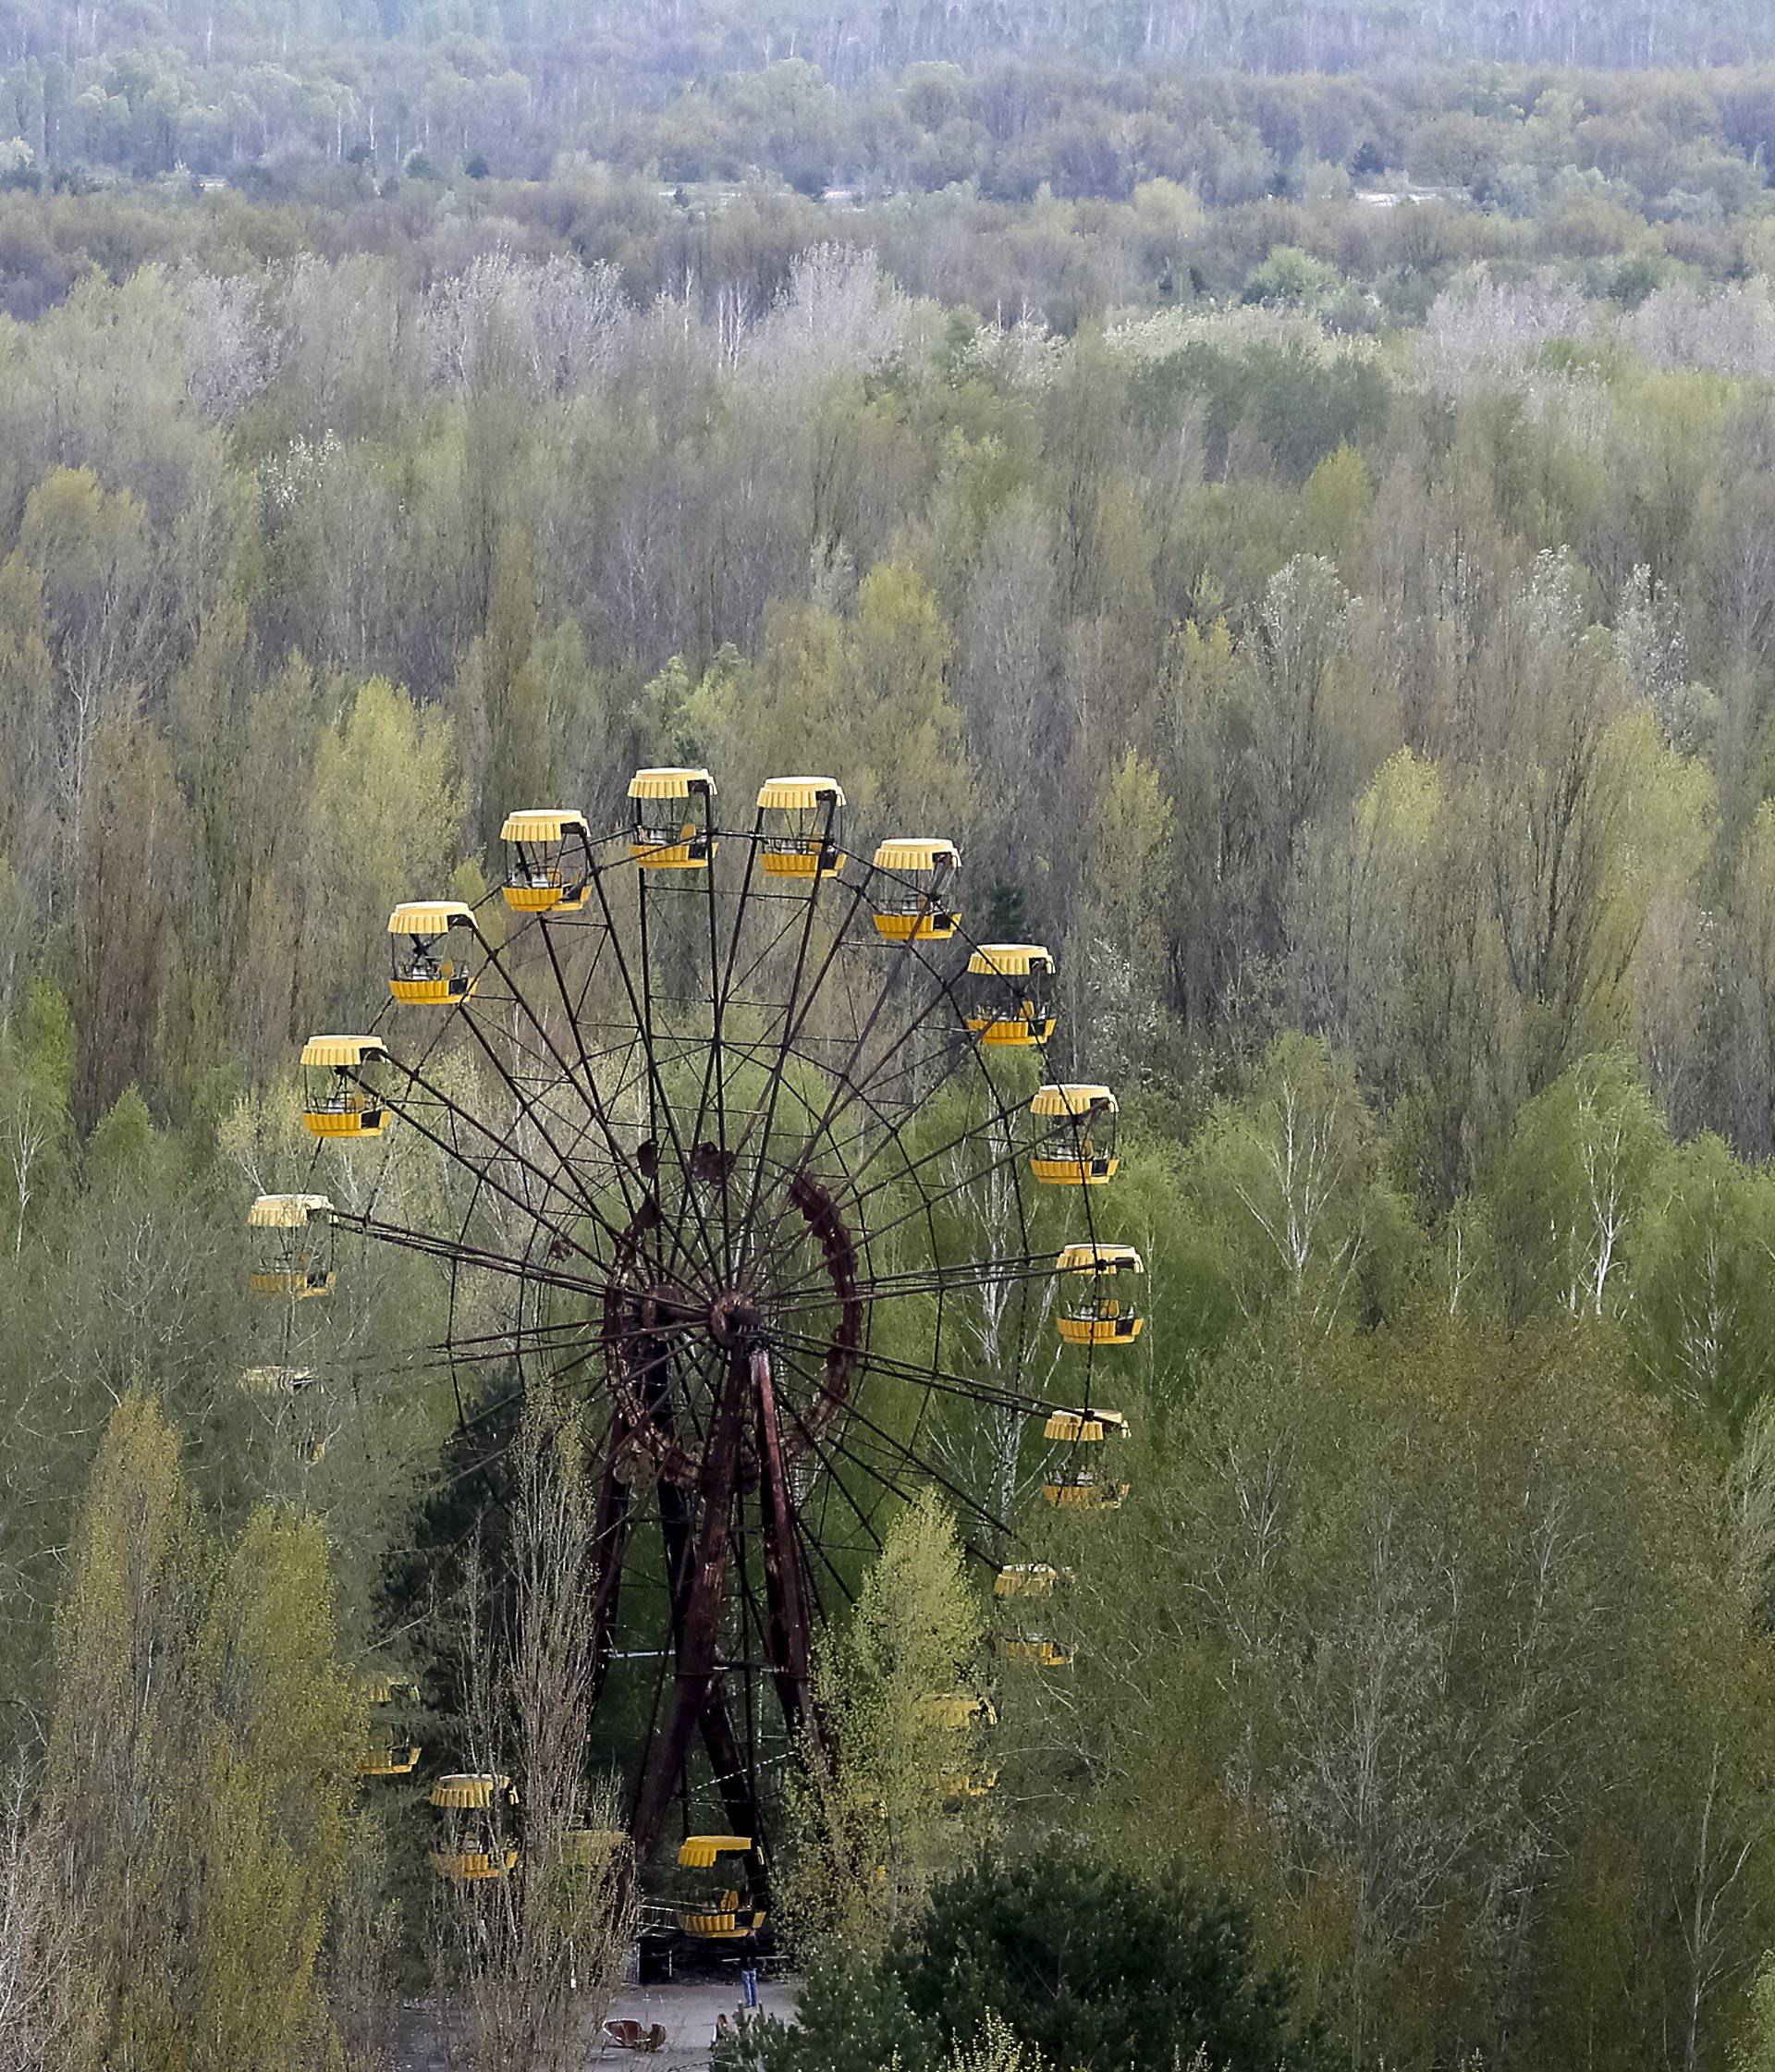 A view of the abandoned city of Pripyat near the Chernobyl nuclear power plant